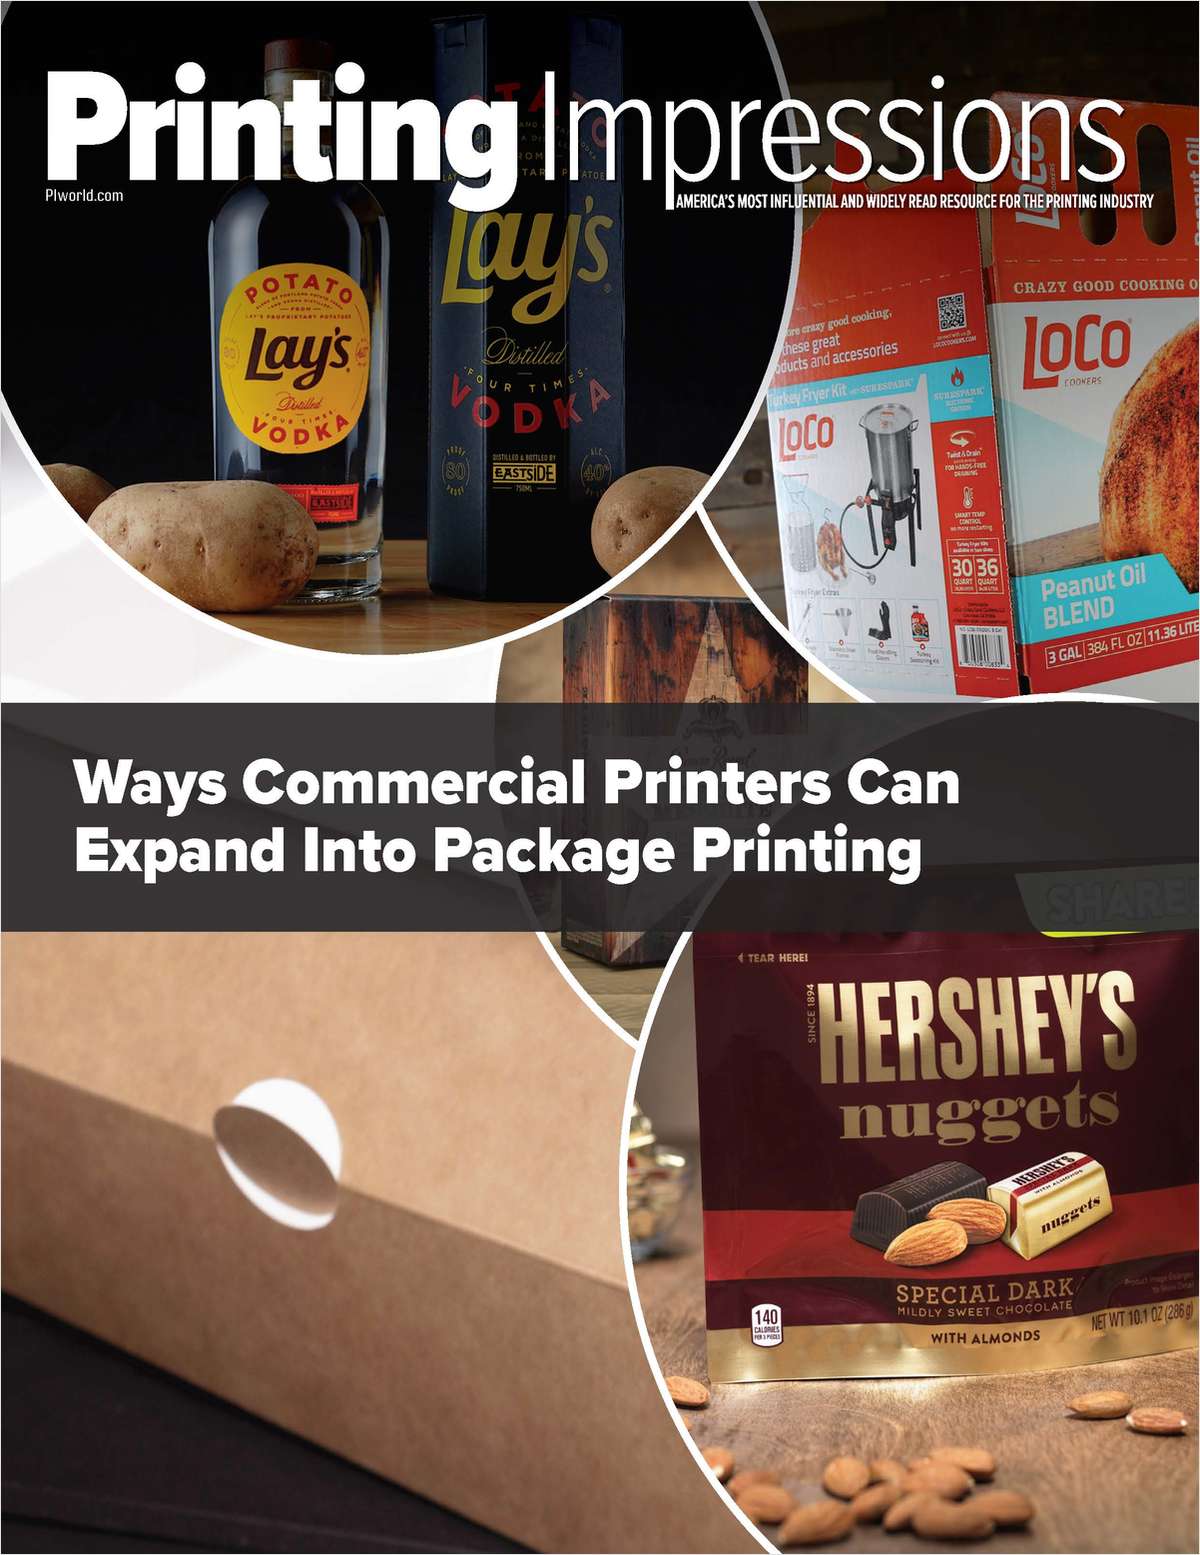 Ways Commercial Printers Can Expand Into Package Printing